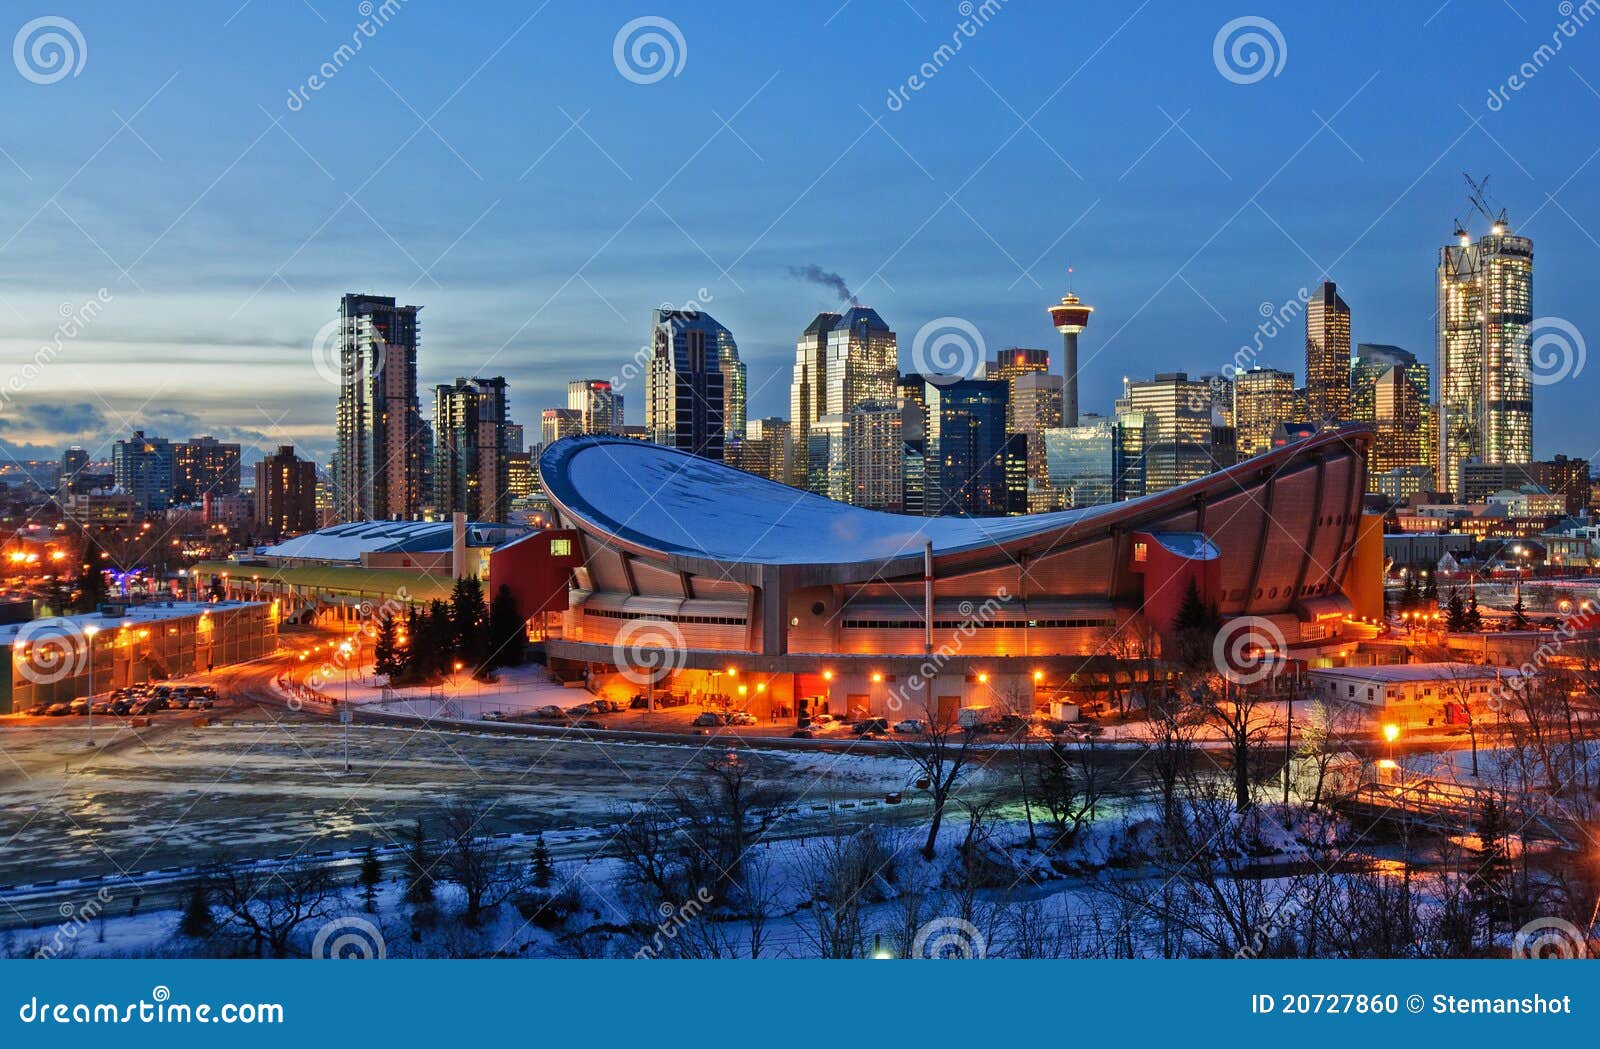 city of calgary skyline at night in the winter